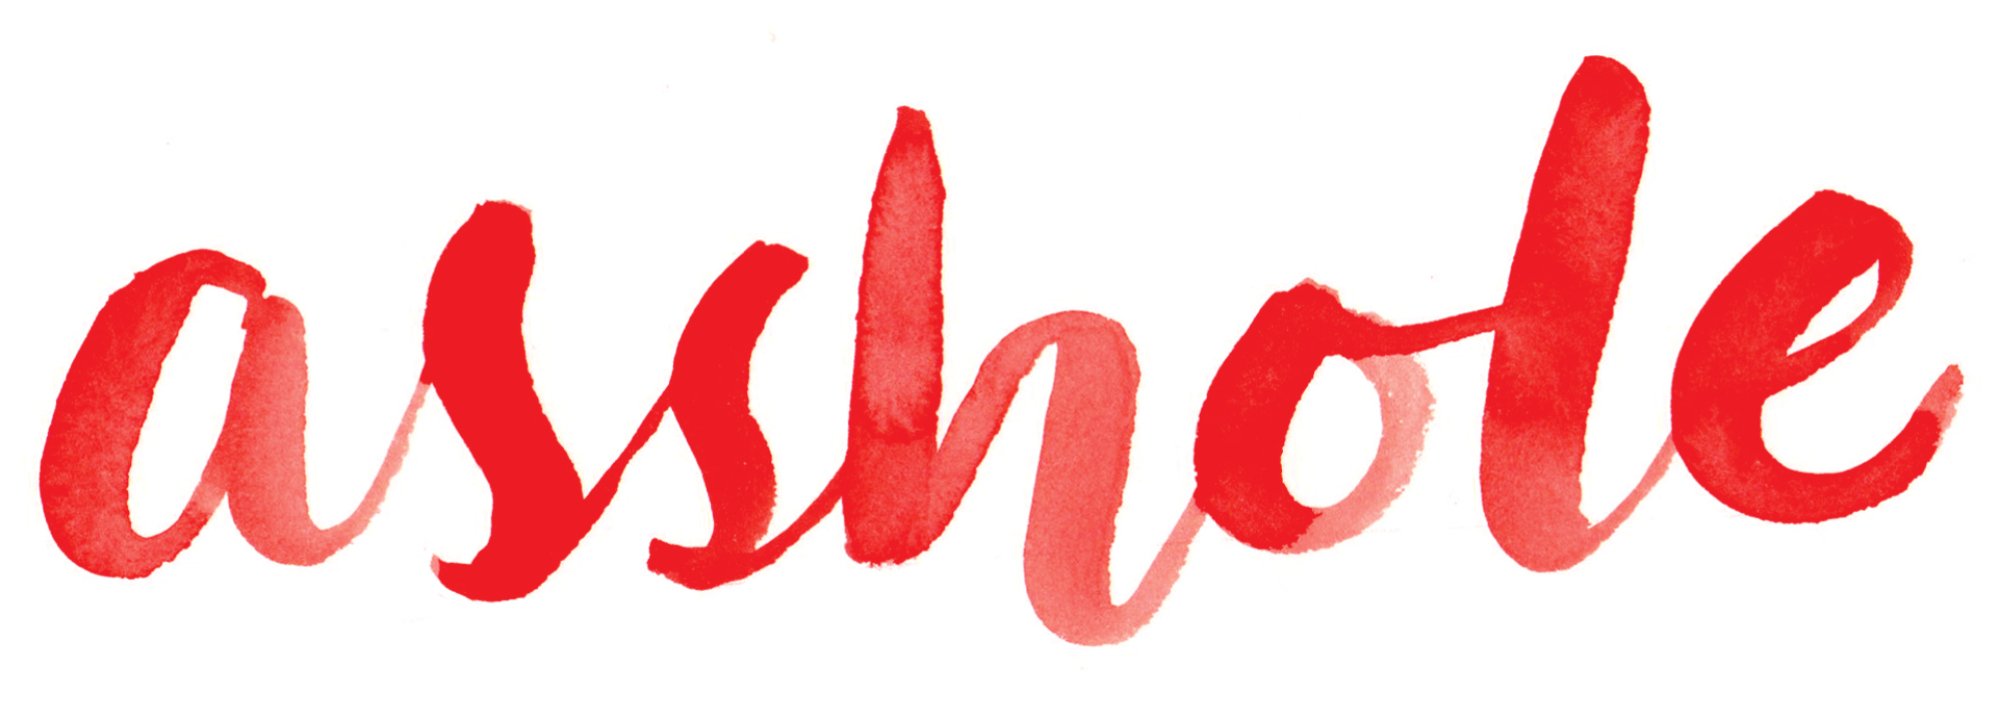 The word "asshole" in red cursive lettering.